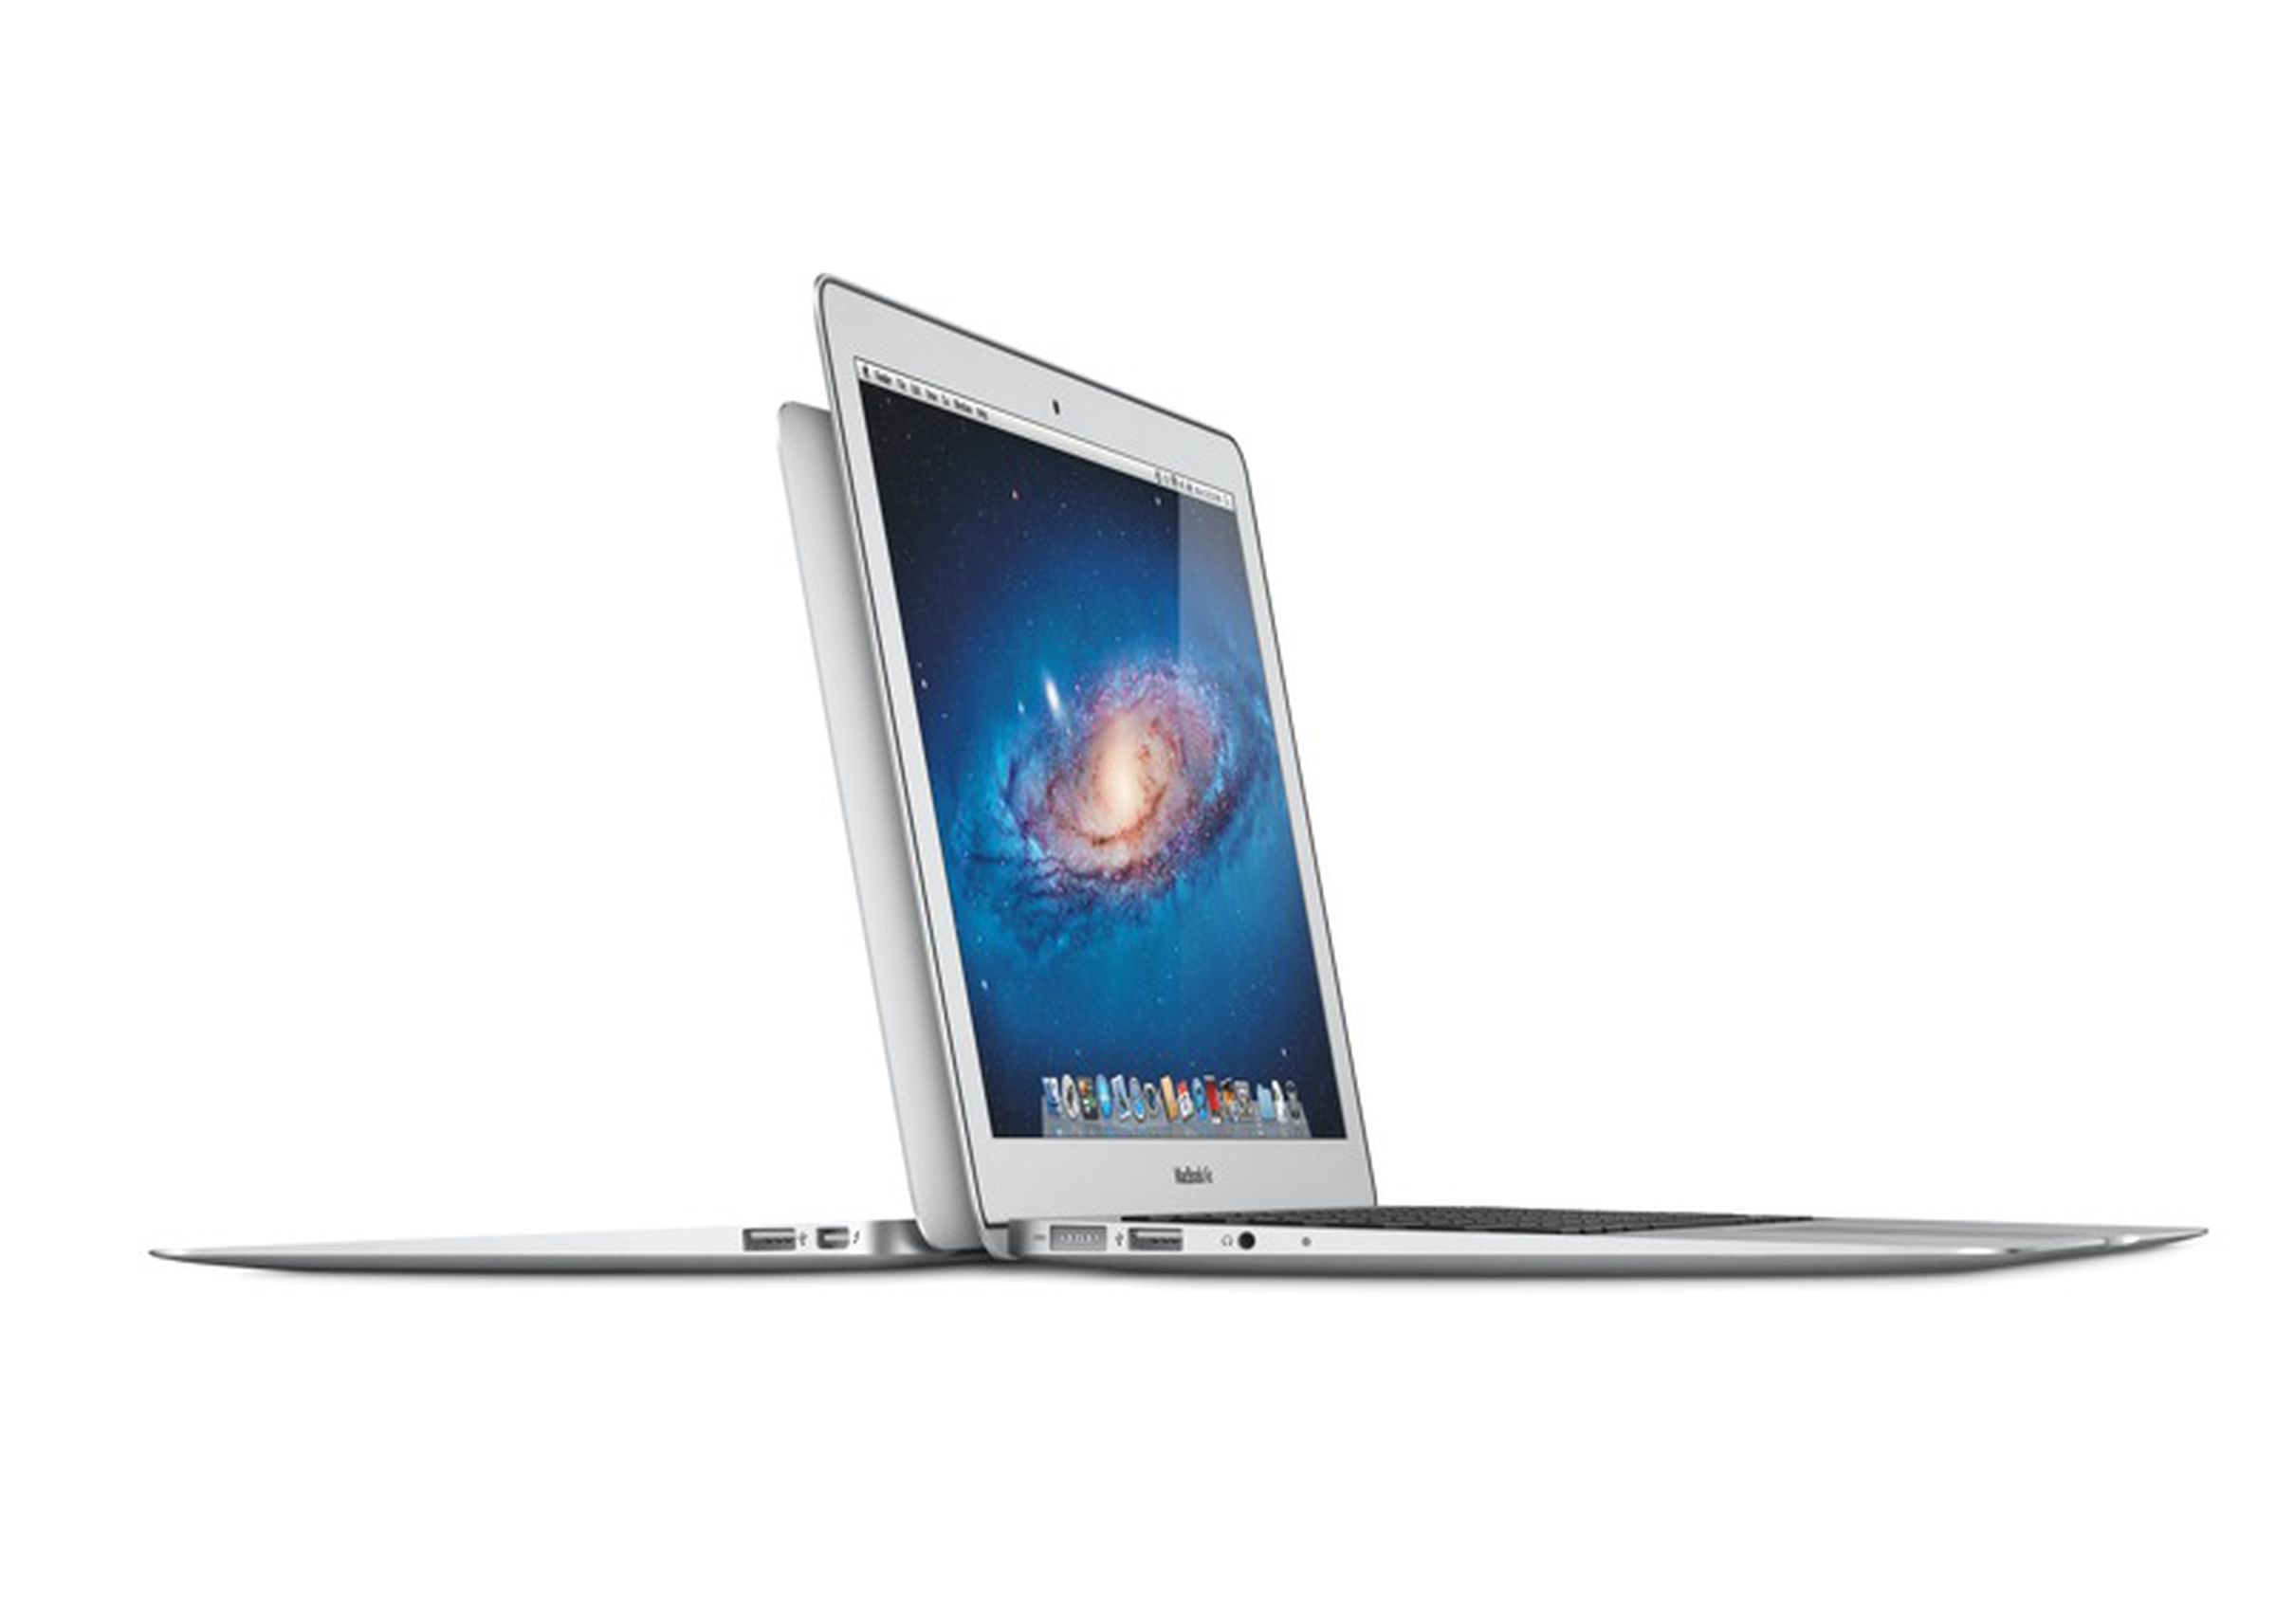 Apple MacBook Air updated with Sandy Bridge processors, Thunderbolt, and backlit keyboards